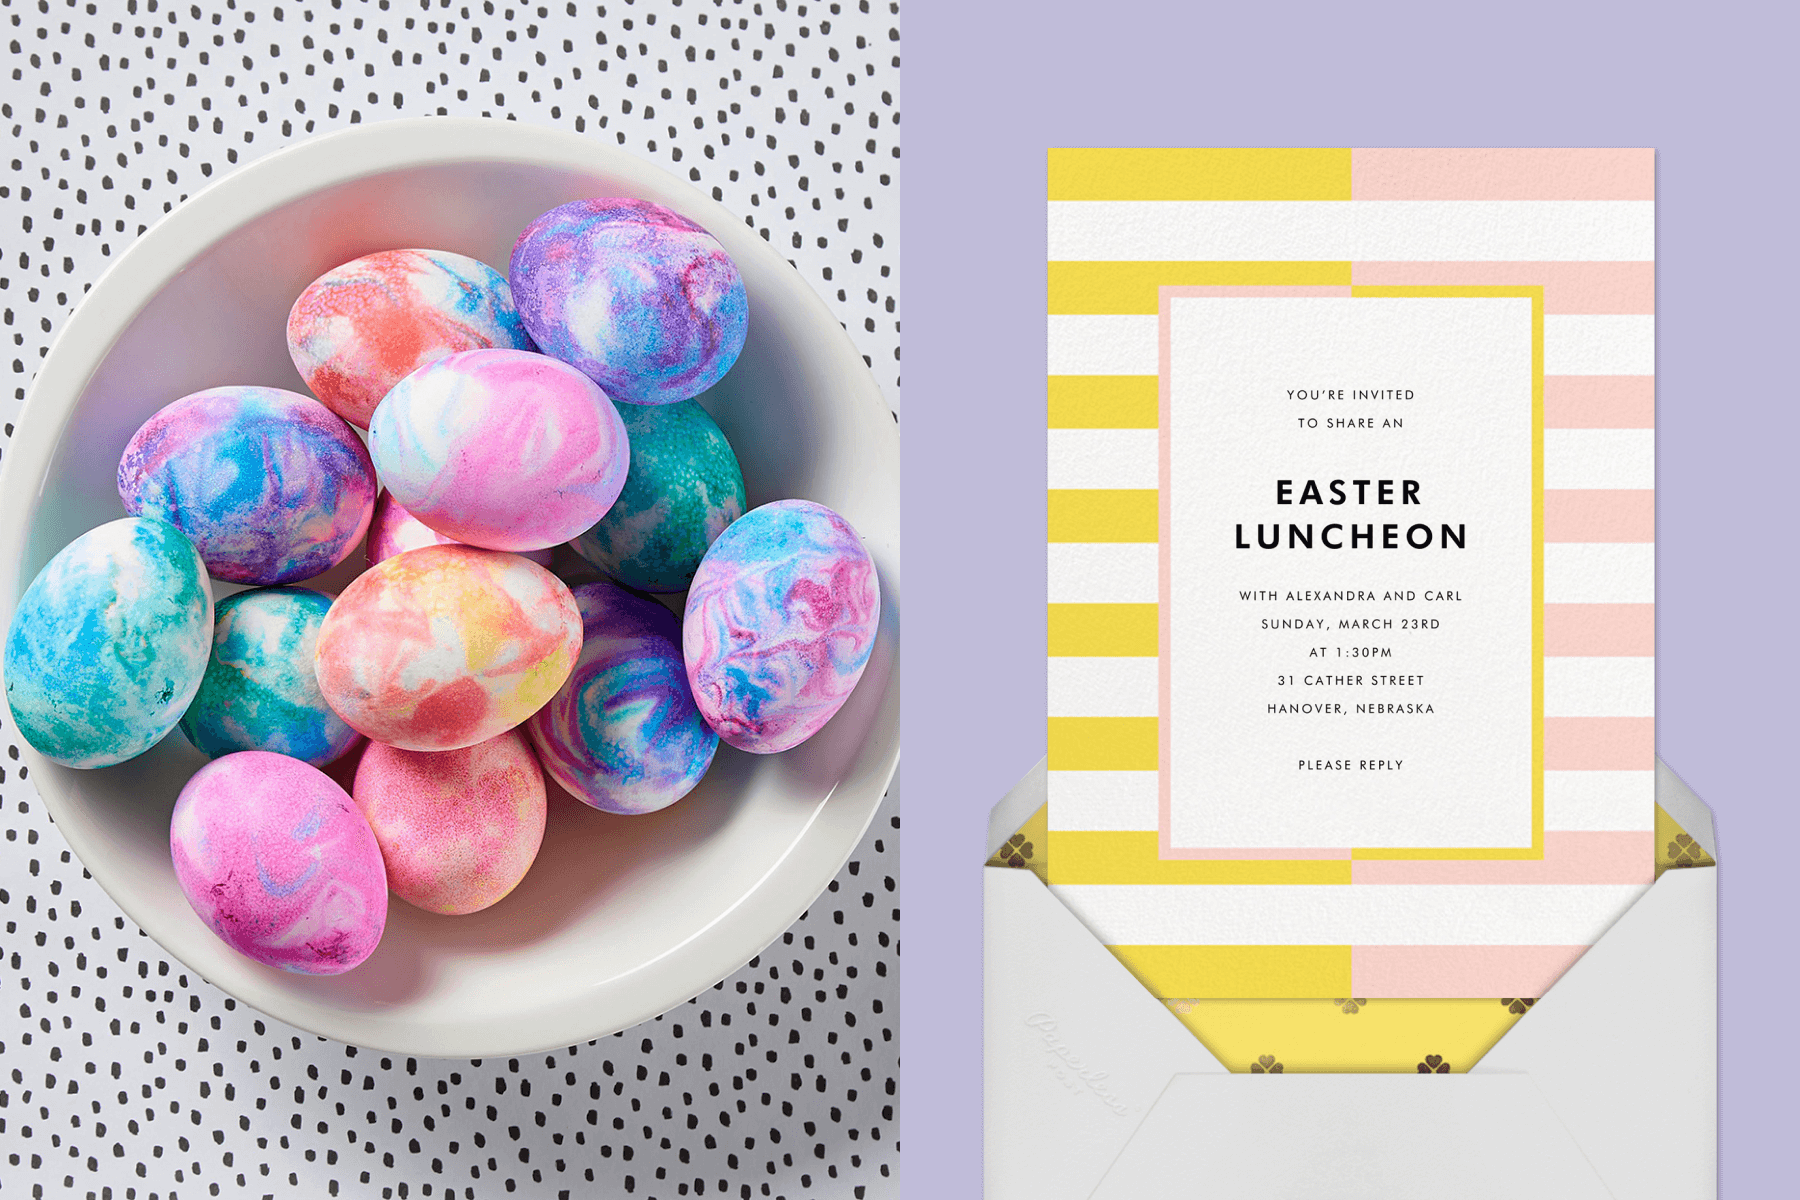 Left: Colorful swirl-painted eggs in a bowl. Right: An Easter invitation with yellow and pink horizontal stripes.